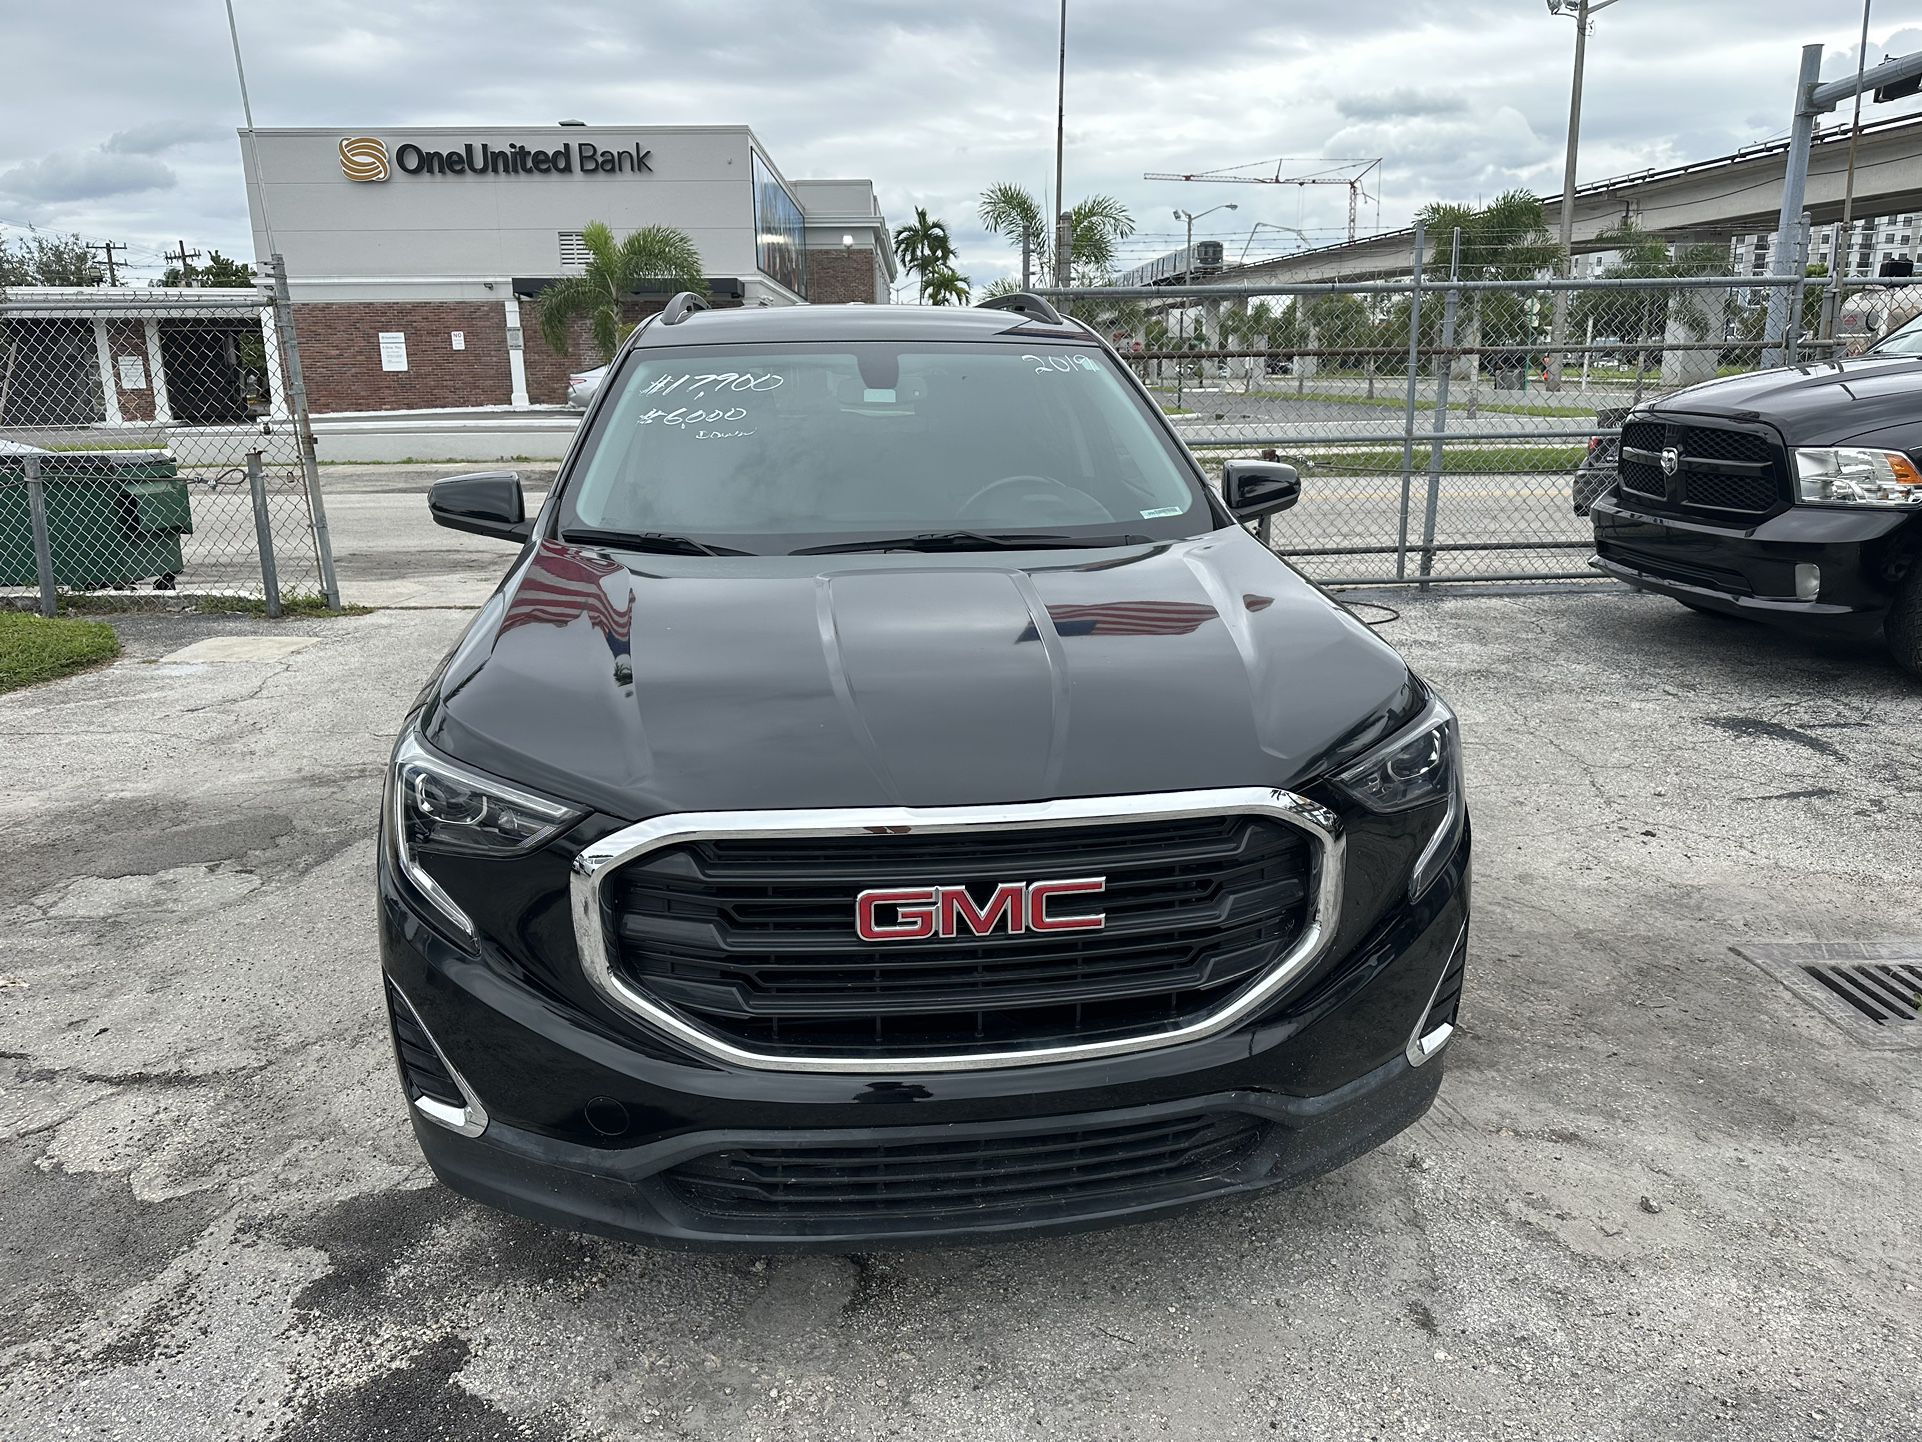 used 2019 gmc terrain - front view 1